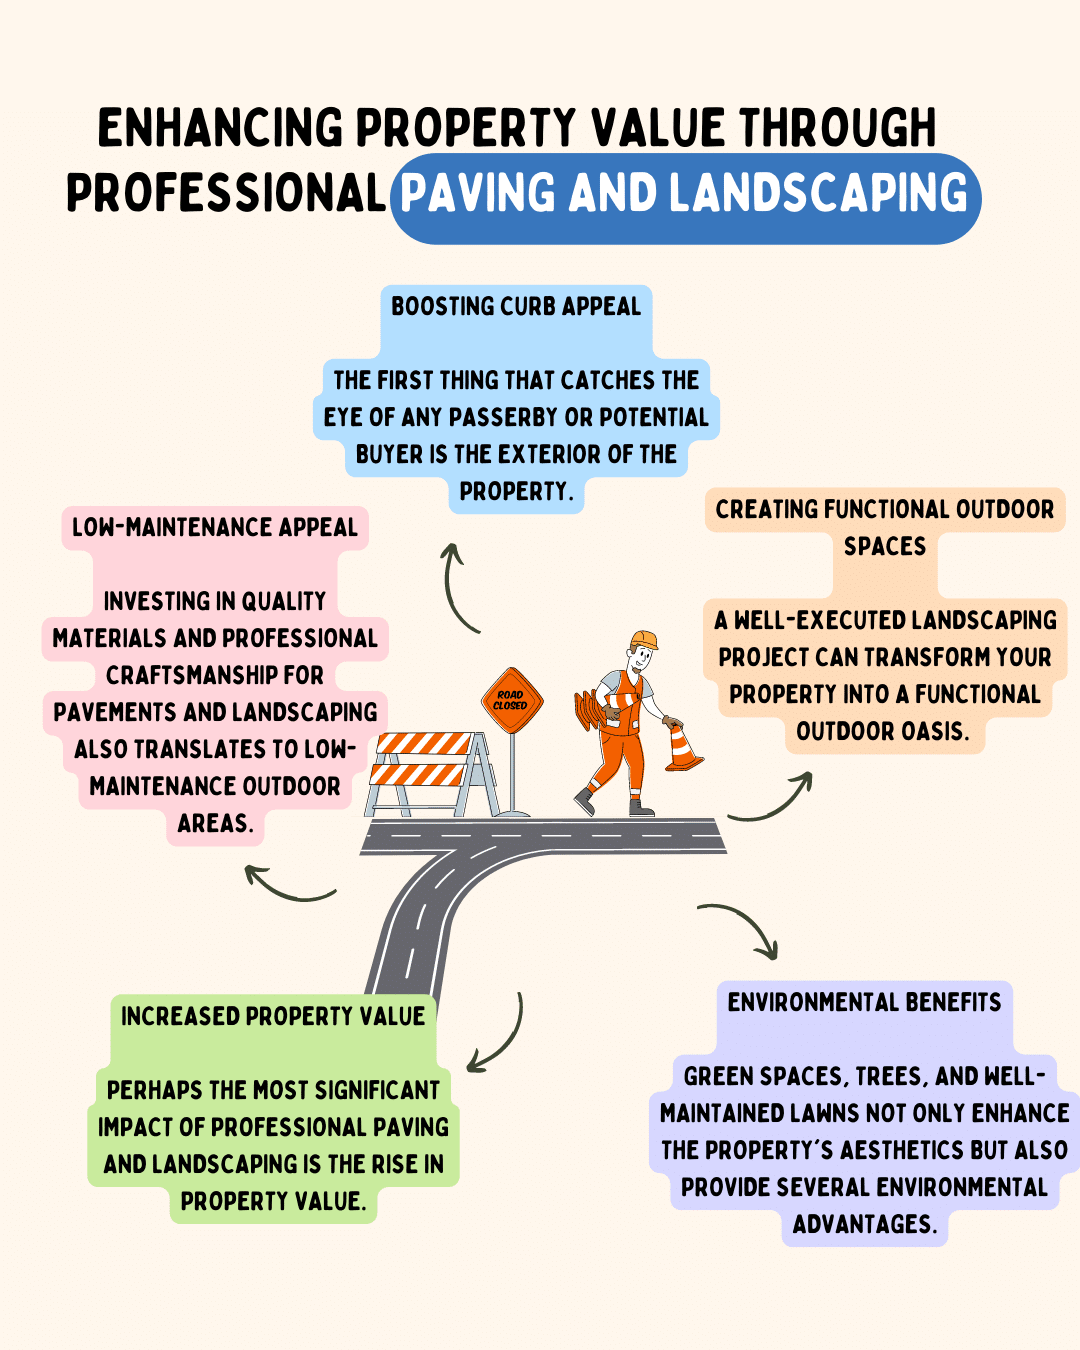 Enhancing Property Value through Professional Paving and Landscaping